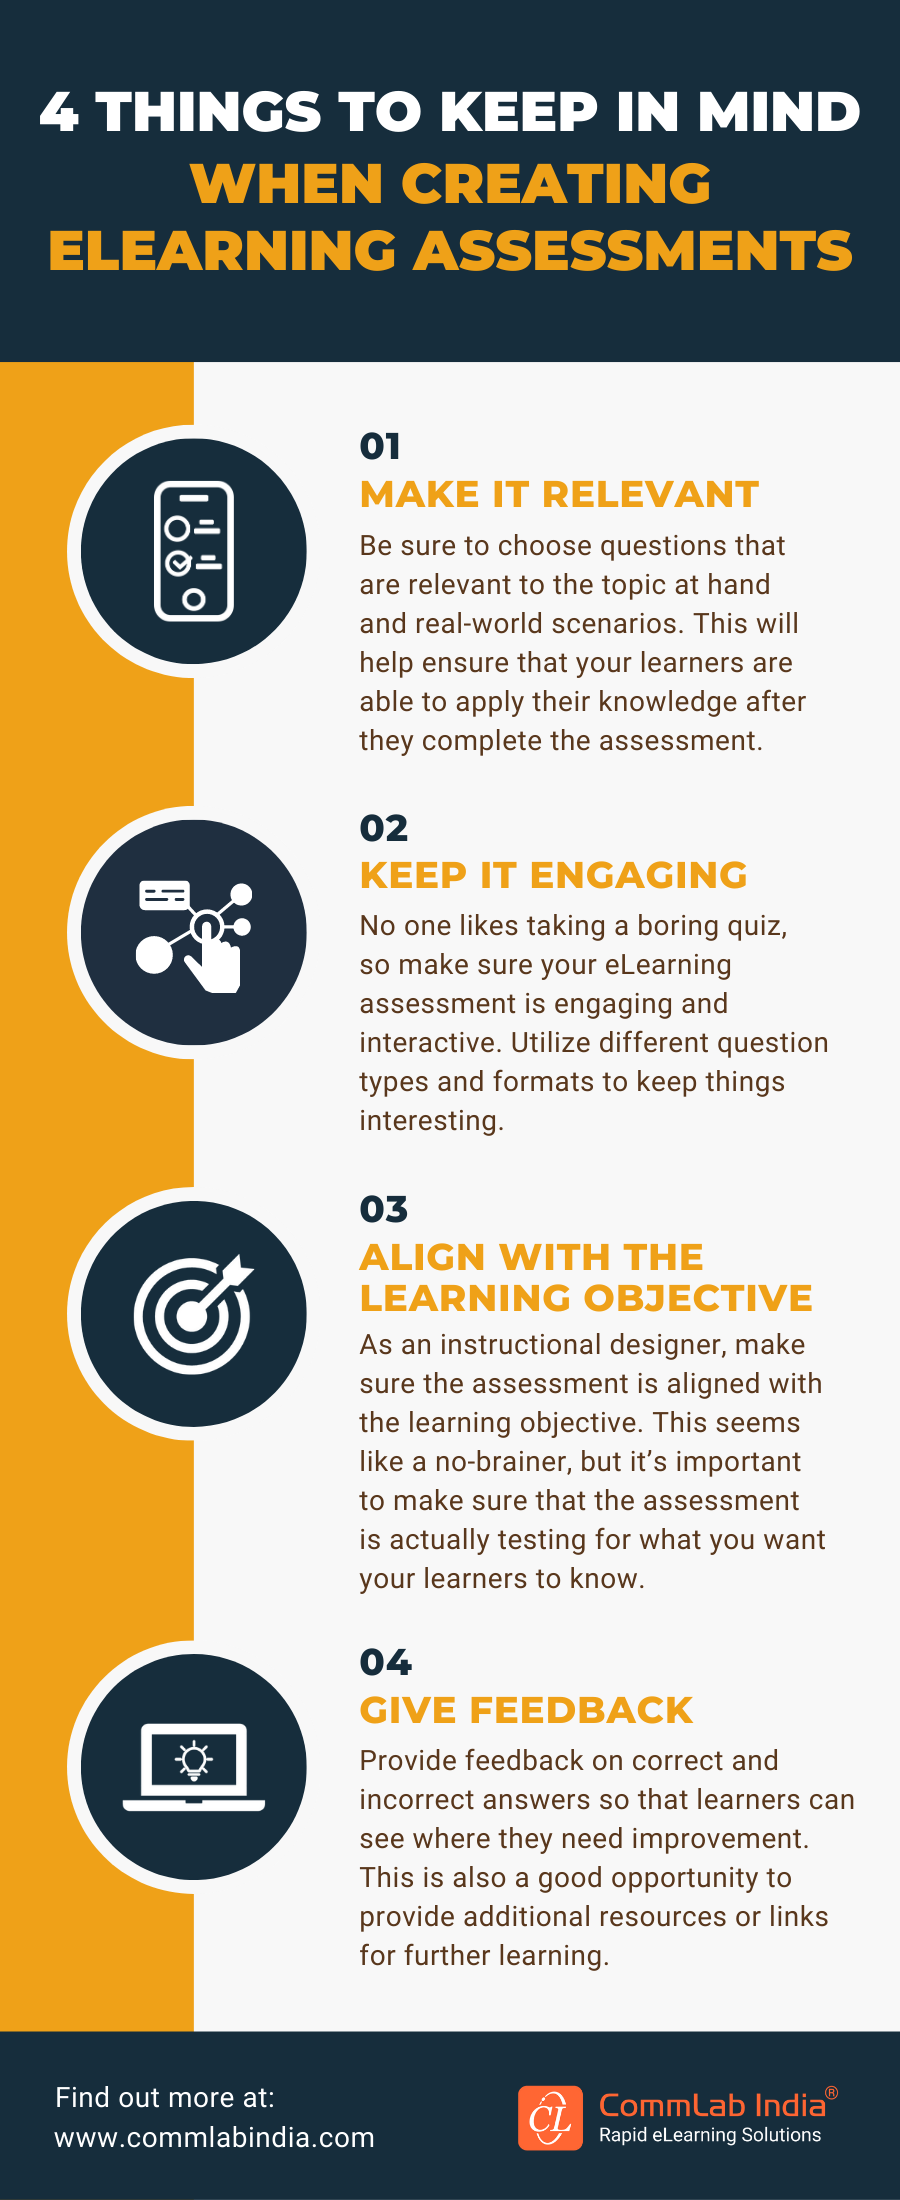 4 Things to Keep in Mind When Creating eLearning Assessments